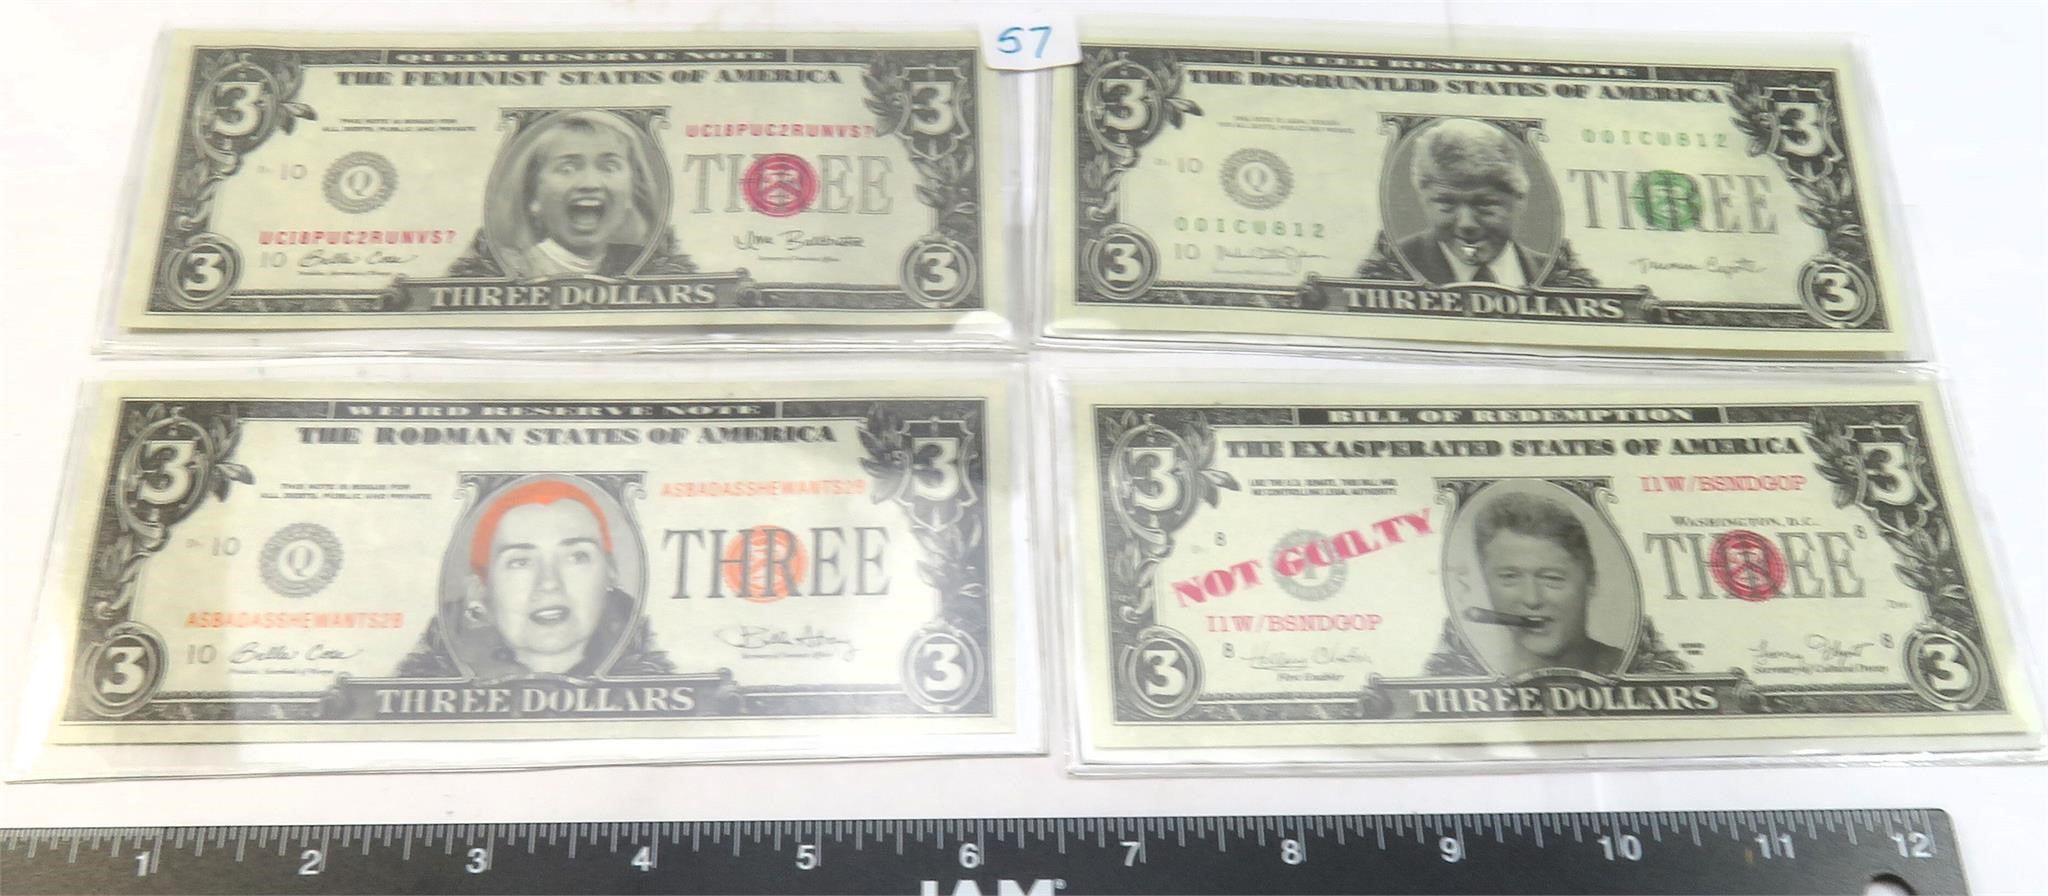 Clinton Currency (Fake and Worthless)